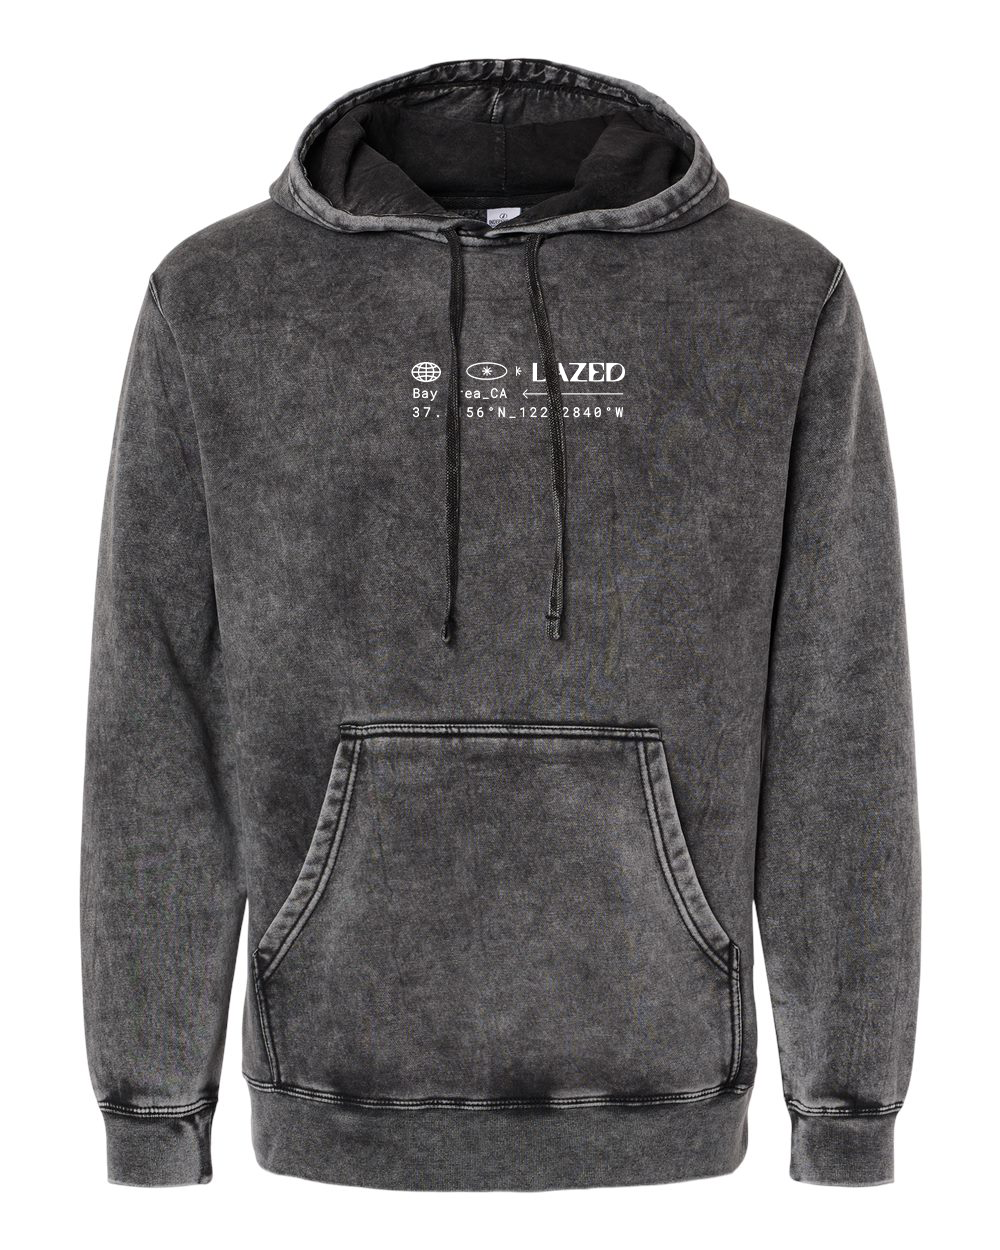 custom design of Independent Trading Co. - PRM4500MW - Unisex Midweight Mineral Wash Hooded Pullover